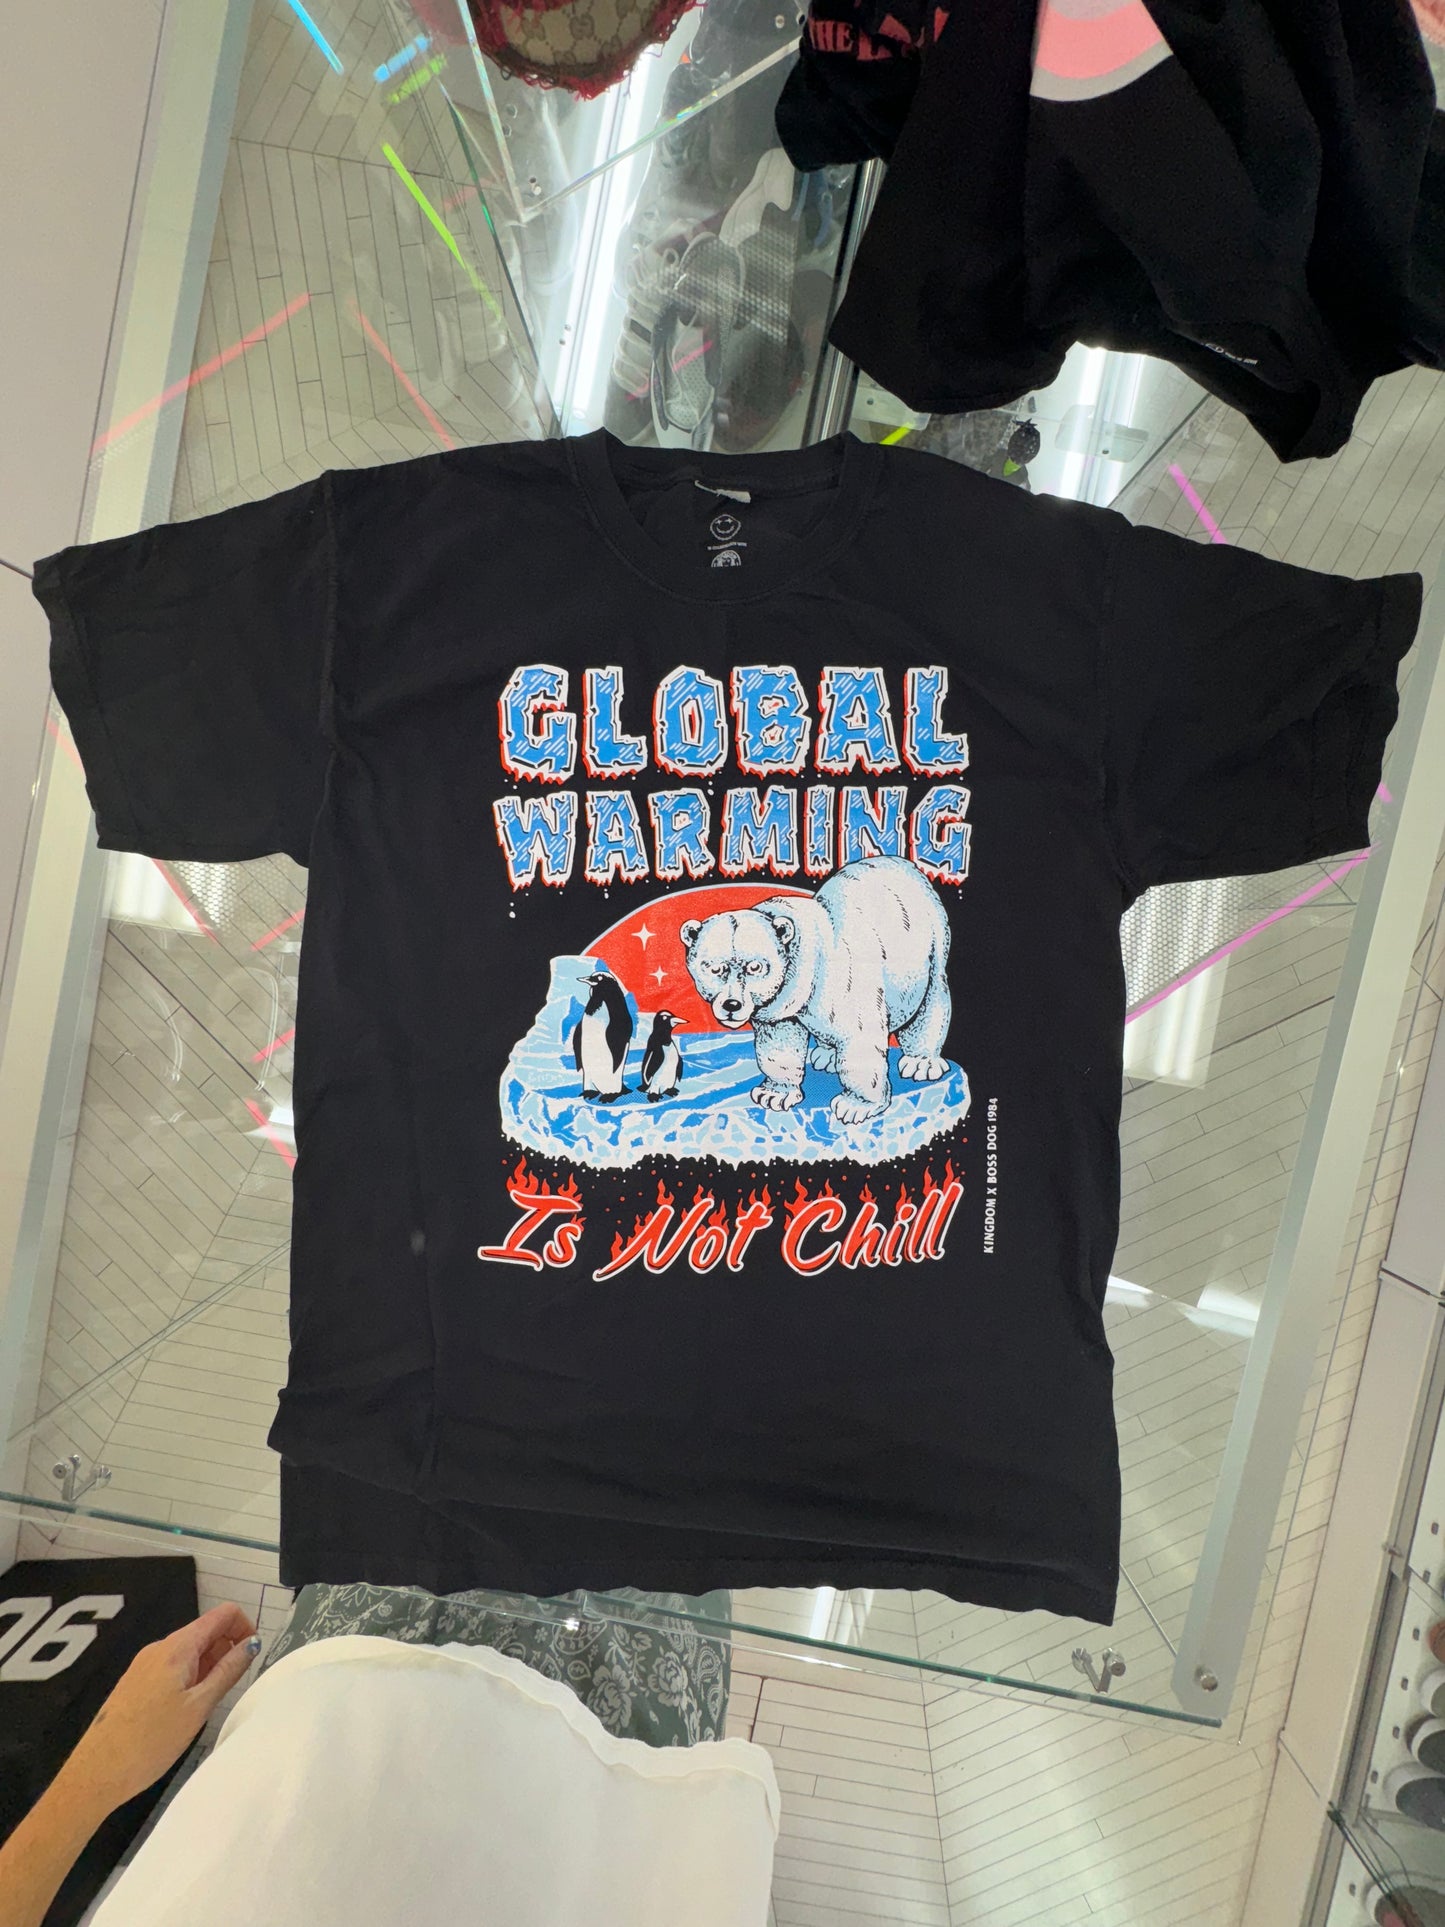 Global Warming “its not chill” tee by Kingdom Black